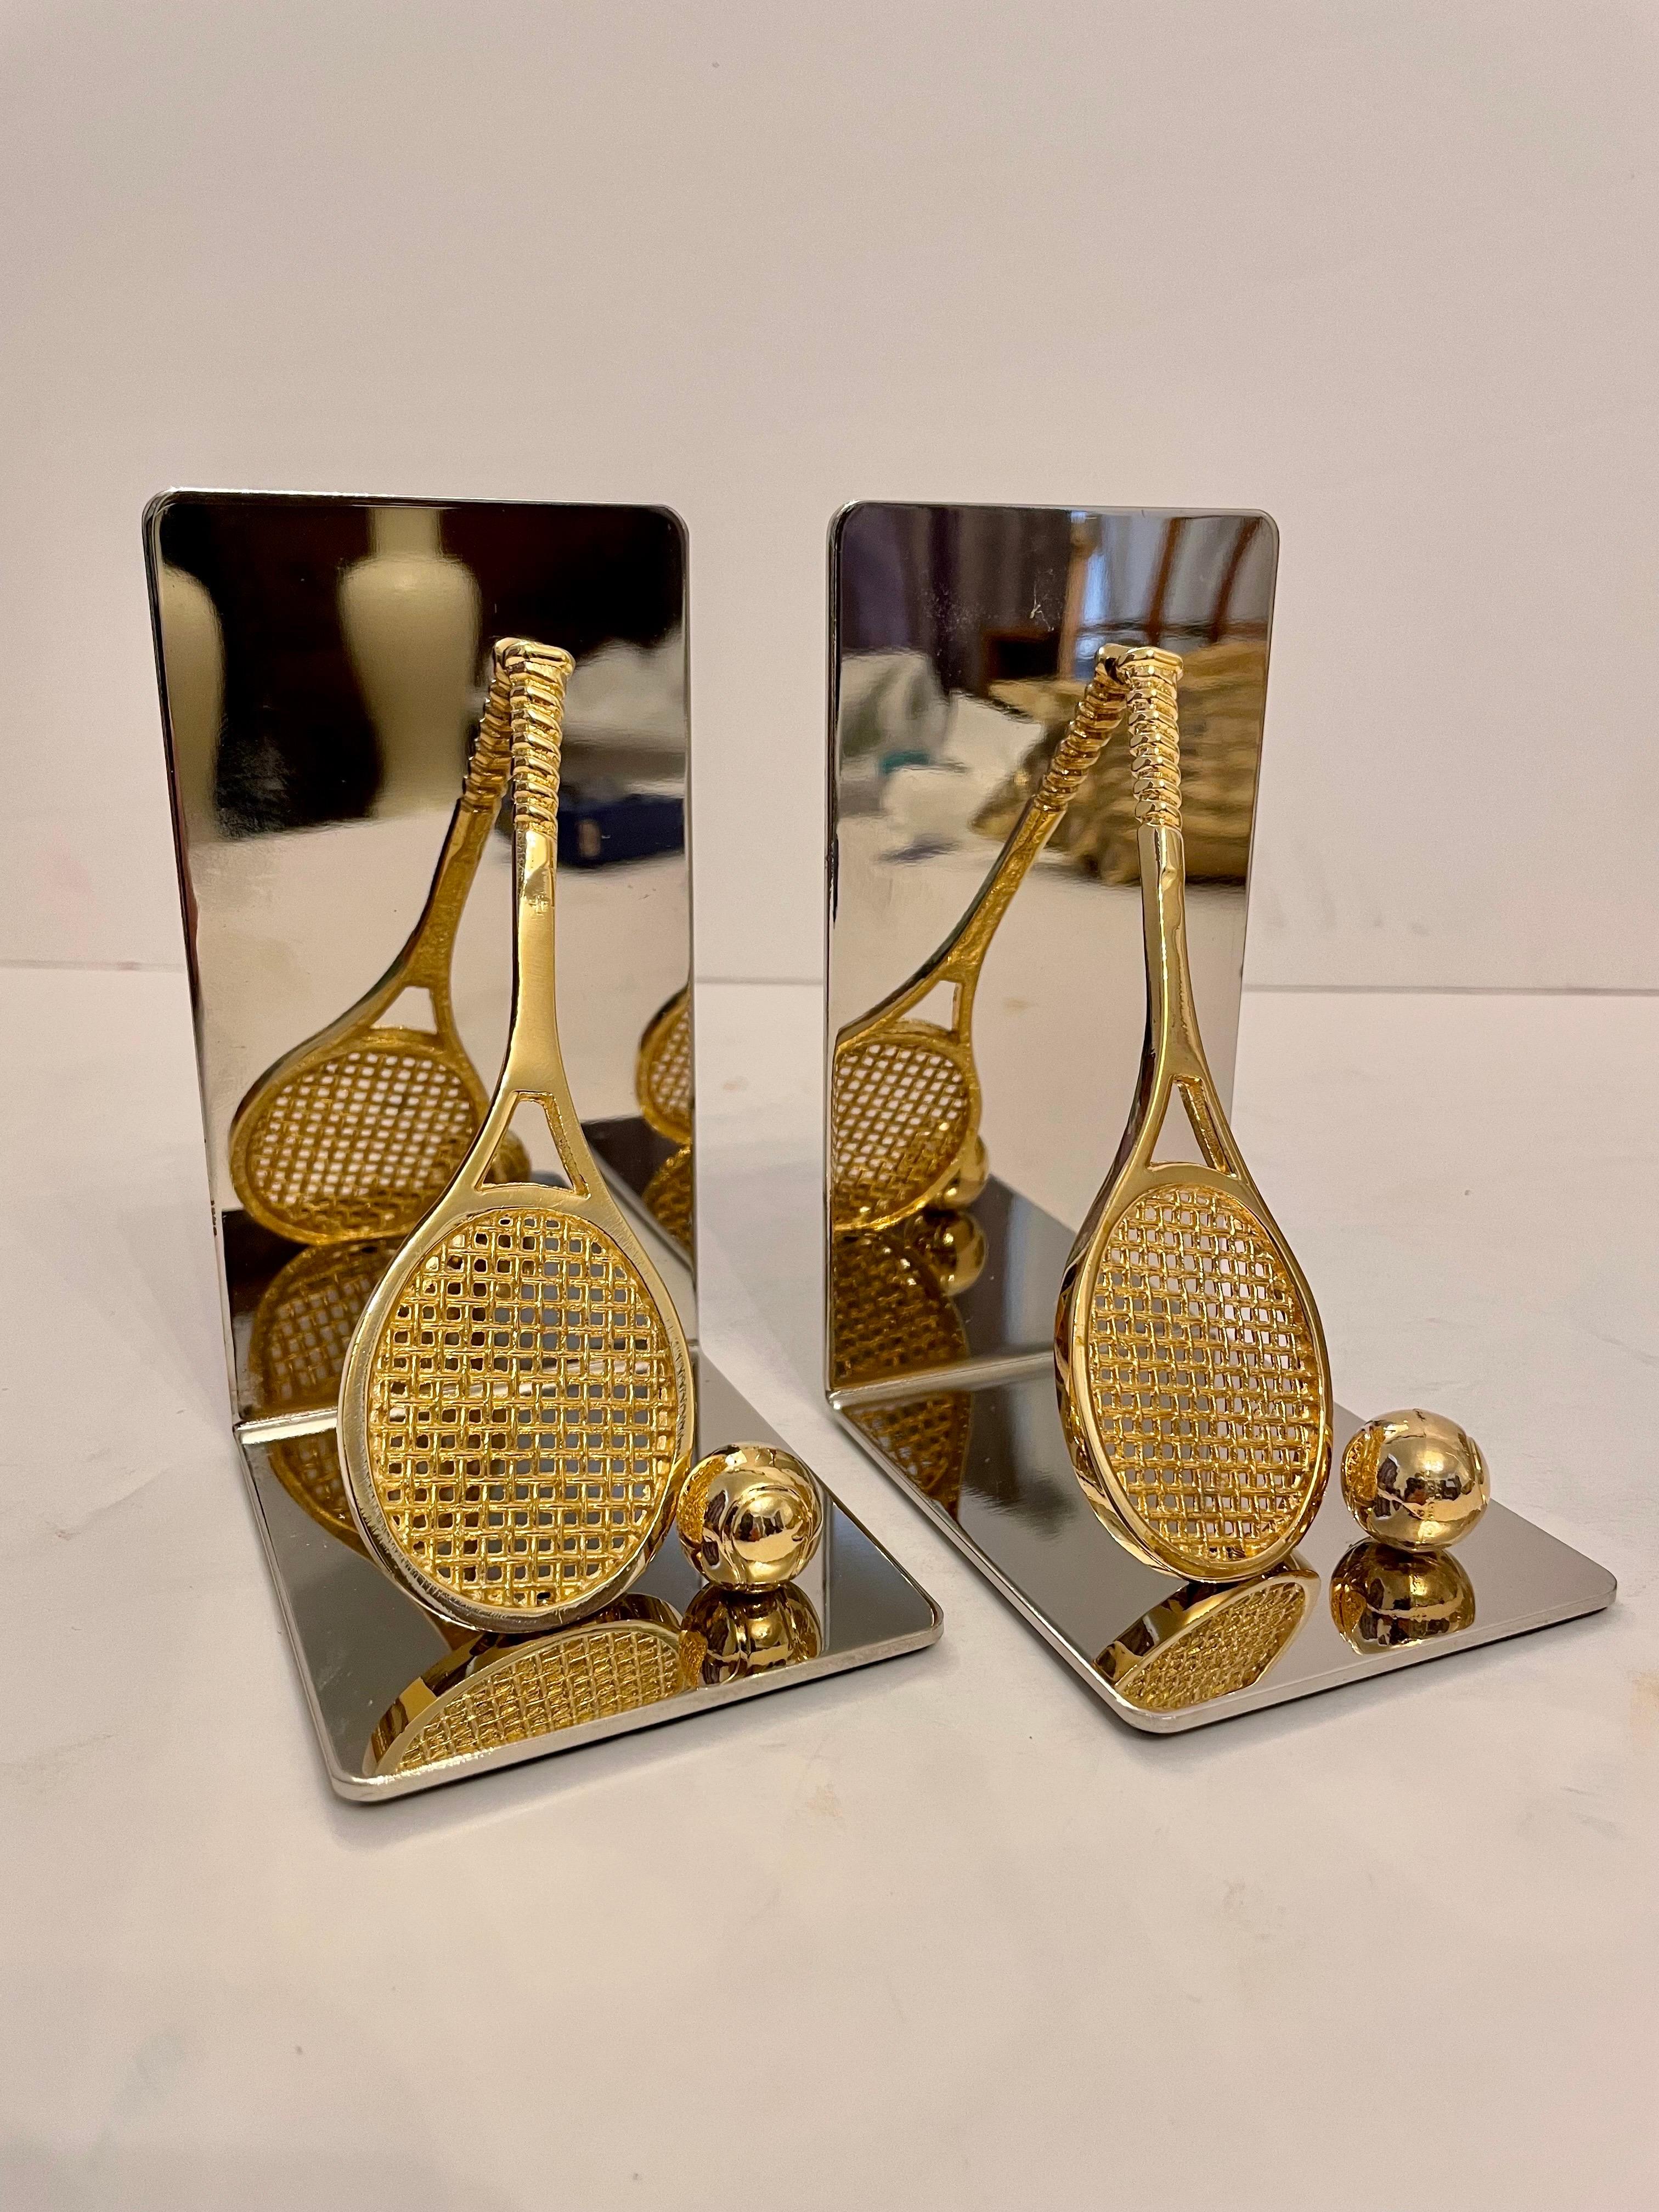 Nice set of brass and chrome tennis racket bookends. Features a brass tennis racket and ball on each. Has thin foam on bottom of each to prevent scratching furniture. 5.5